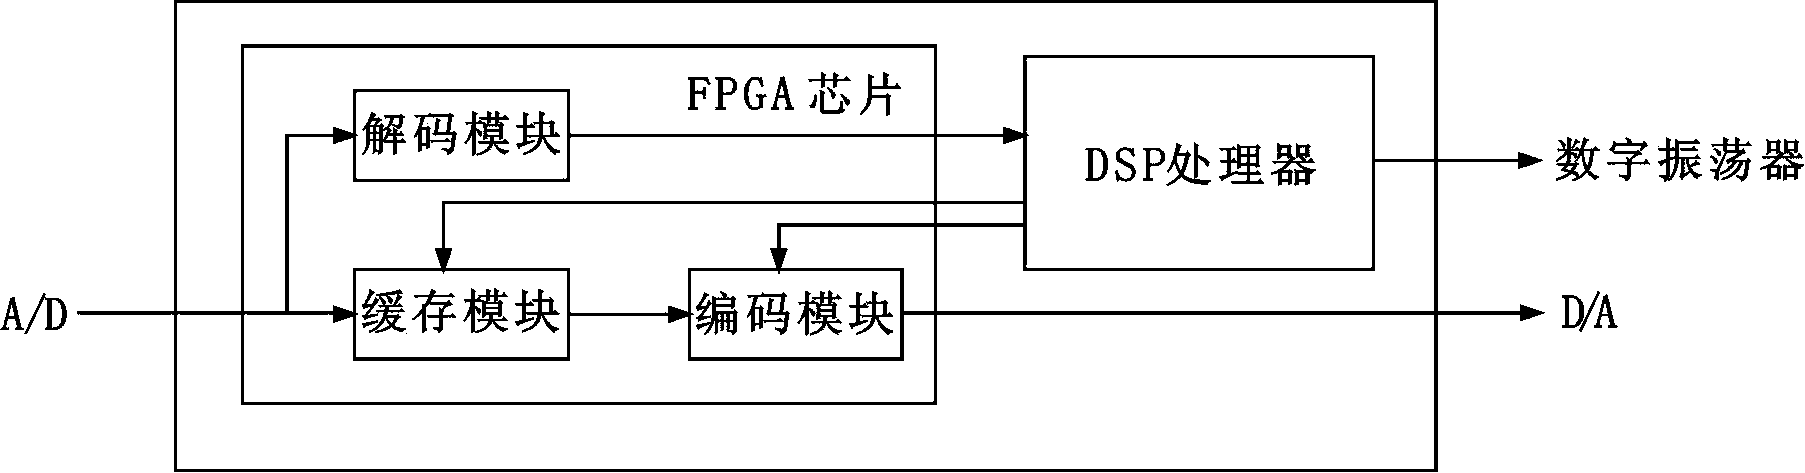 Digital processing system and method applied to repeater of global system for mobile communication (GSM) frequency hopping network